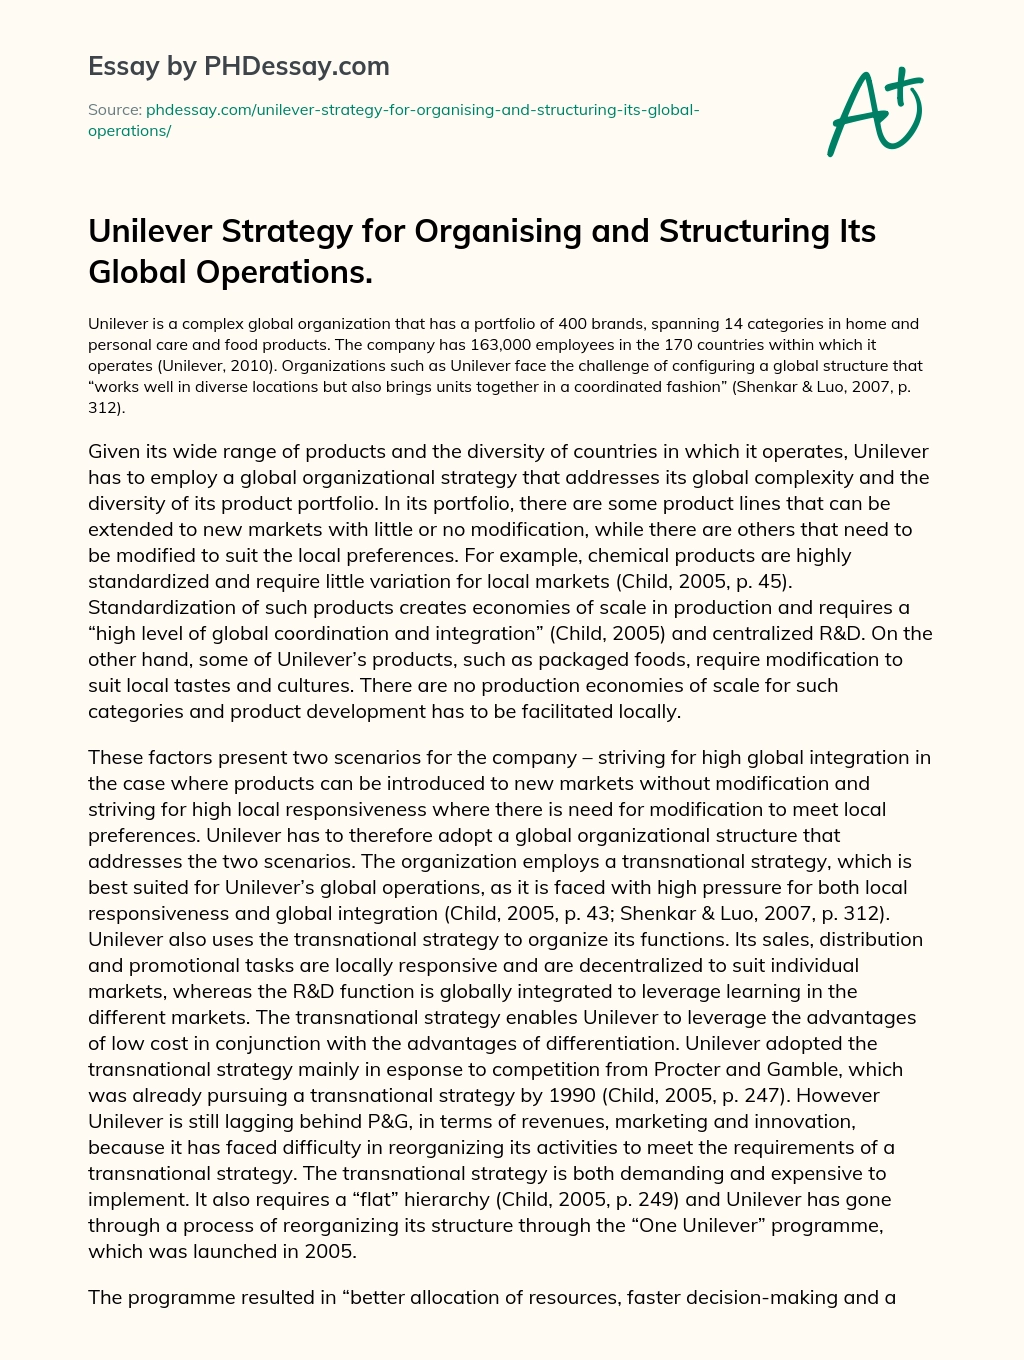 Unilever Strategy for Organising and Structuring Its Global Operations. essay